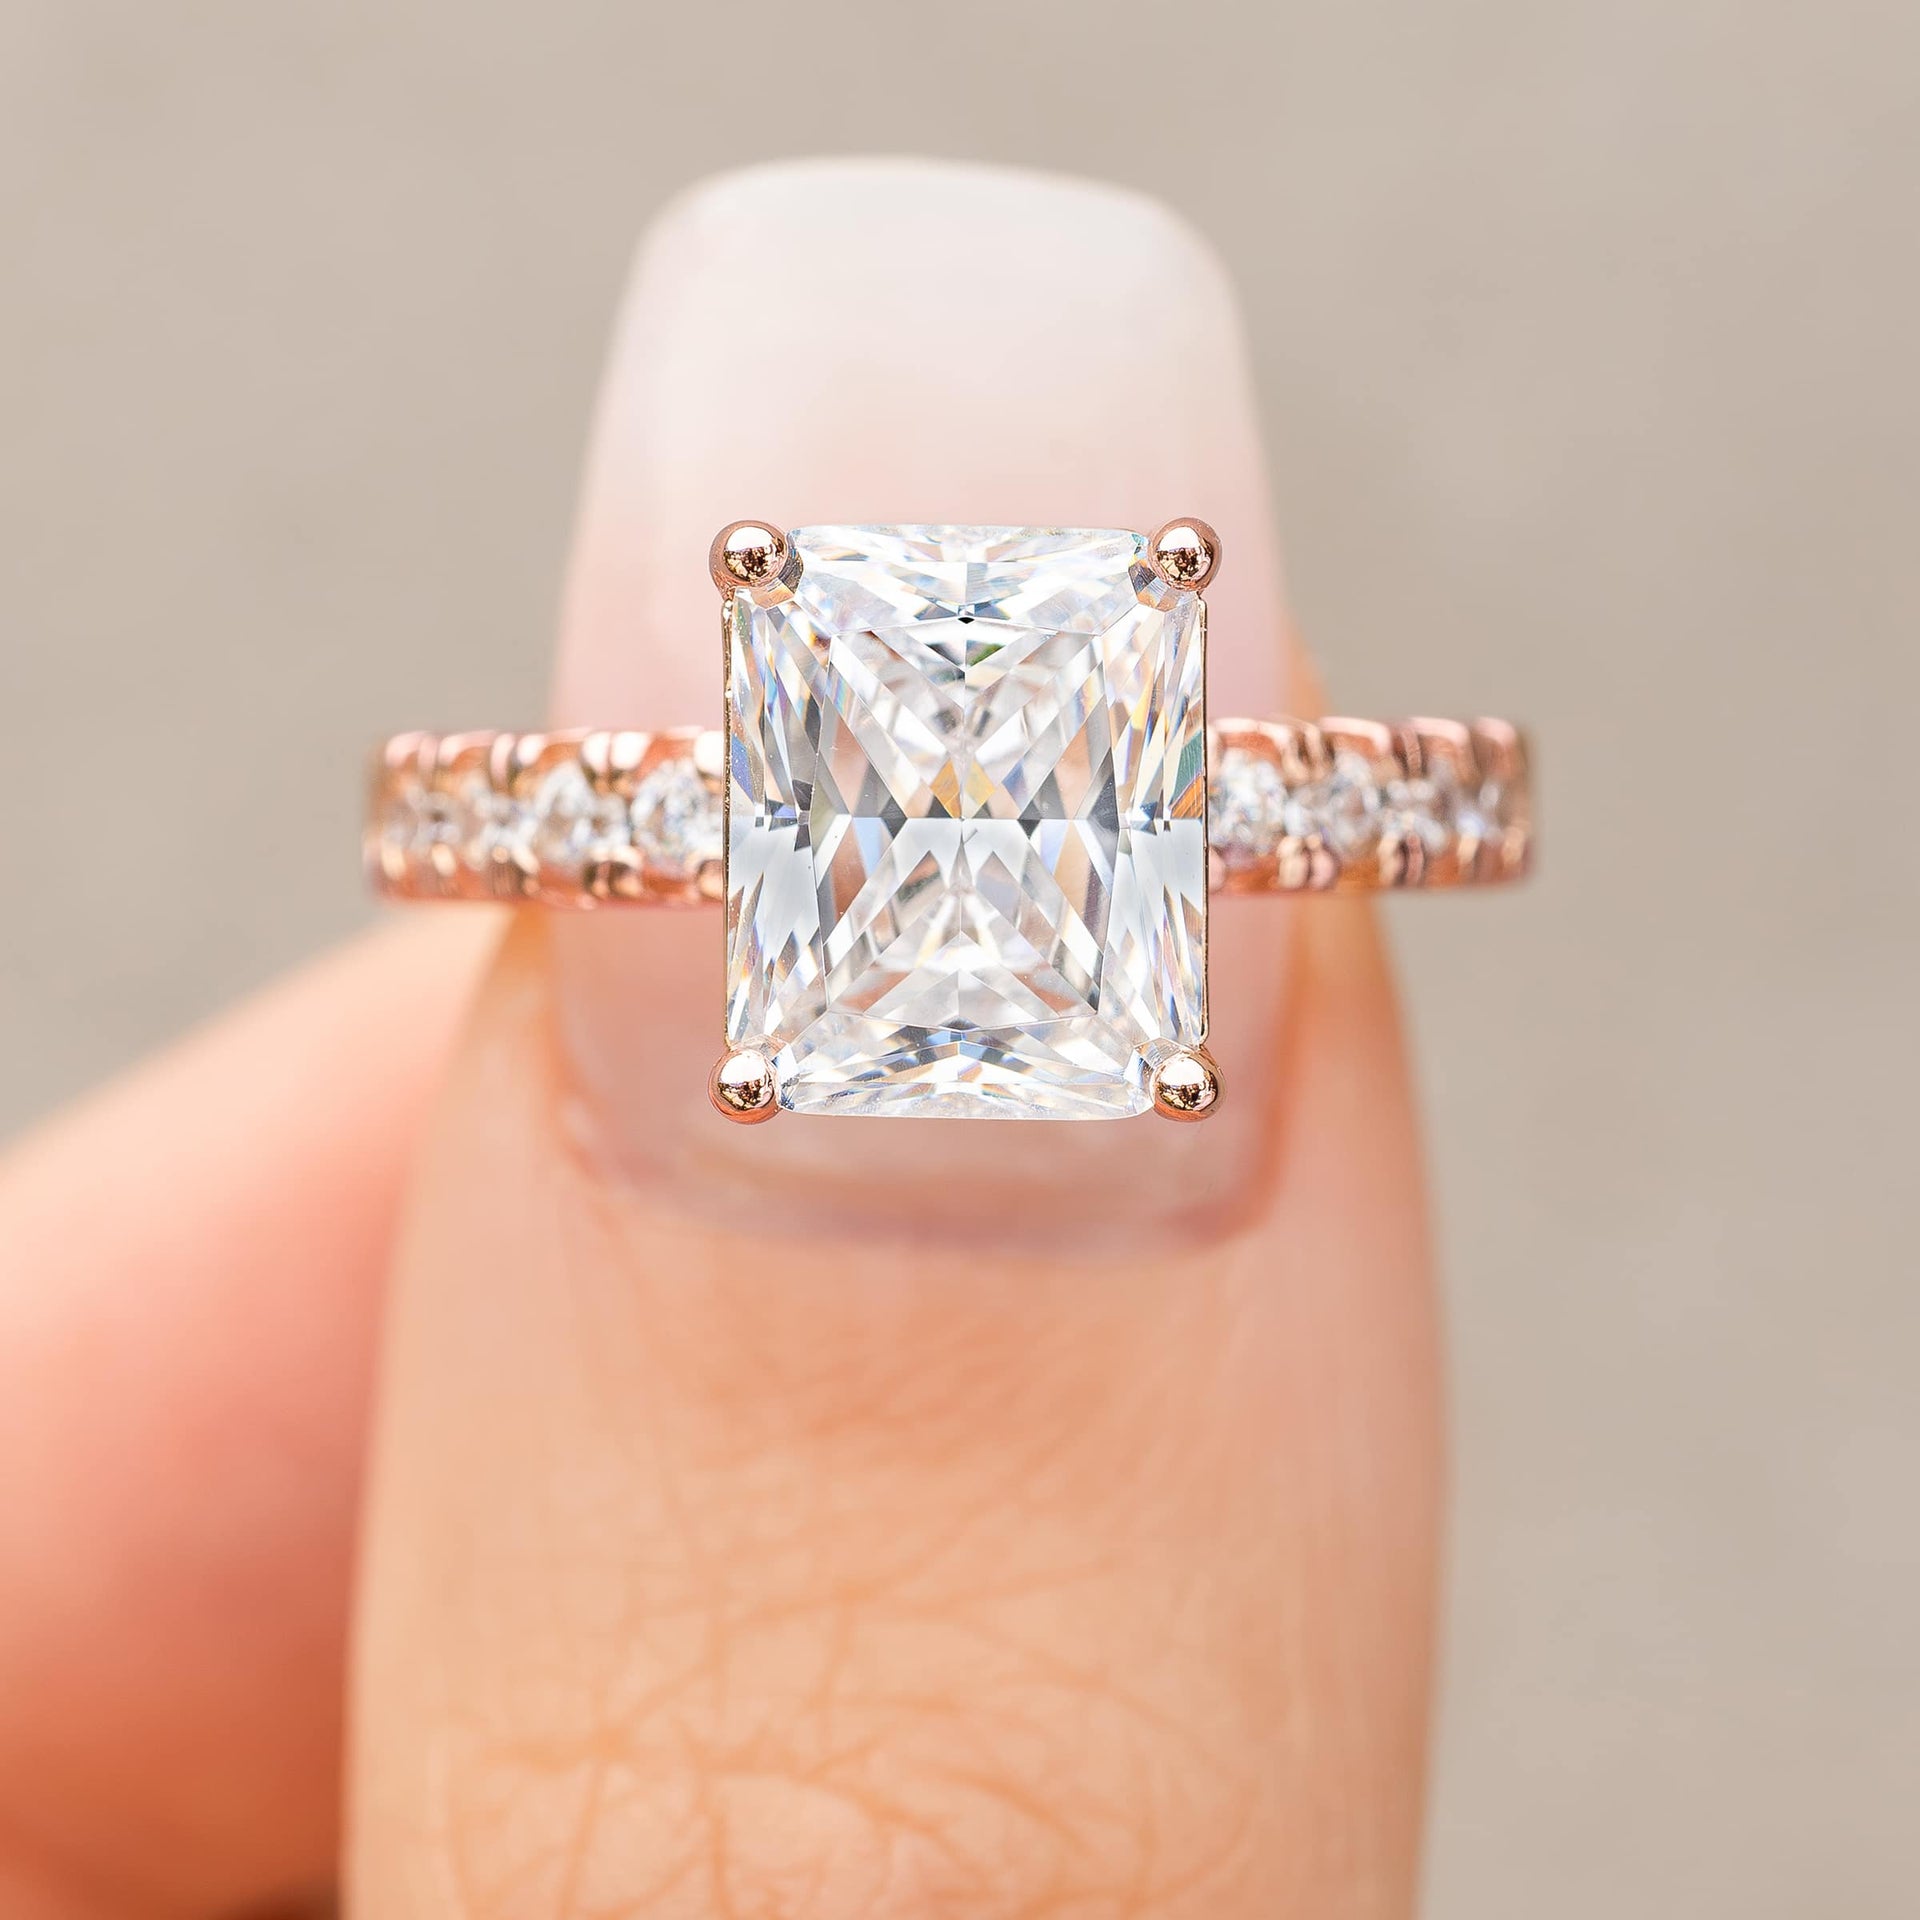 3.75 carat rose gold engagement ring shown in silver modeled on female with light pink nails 